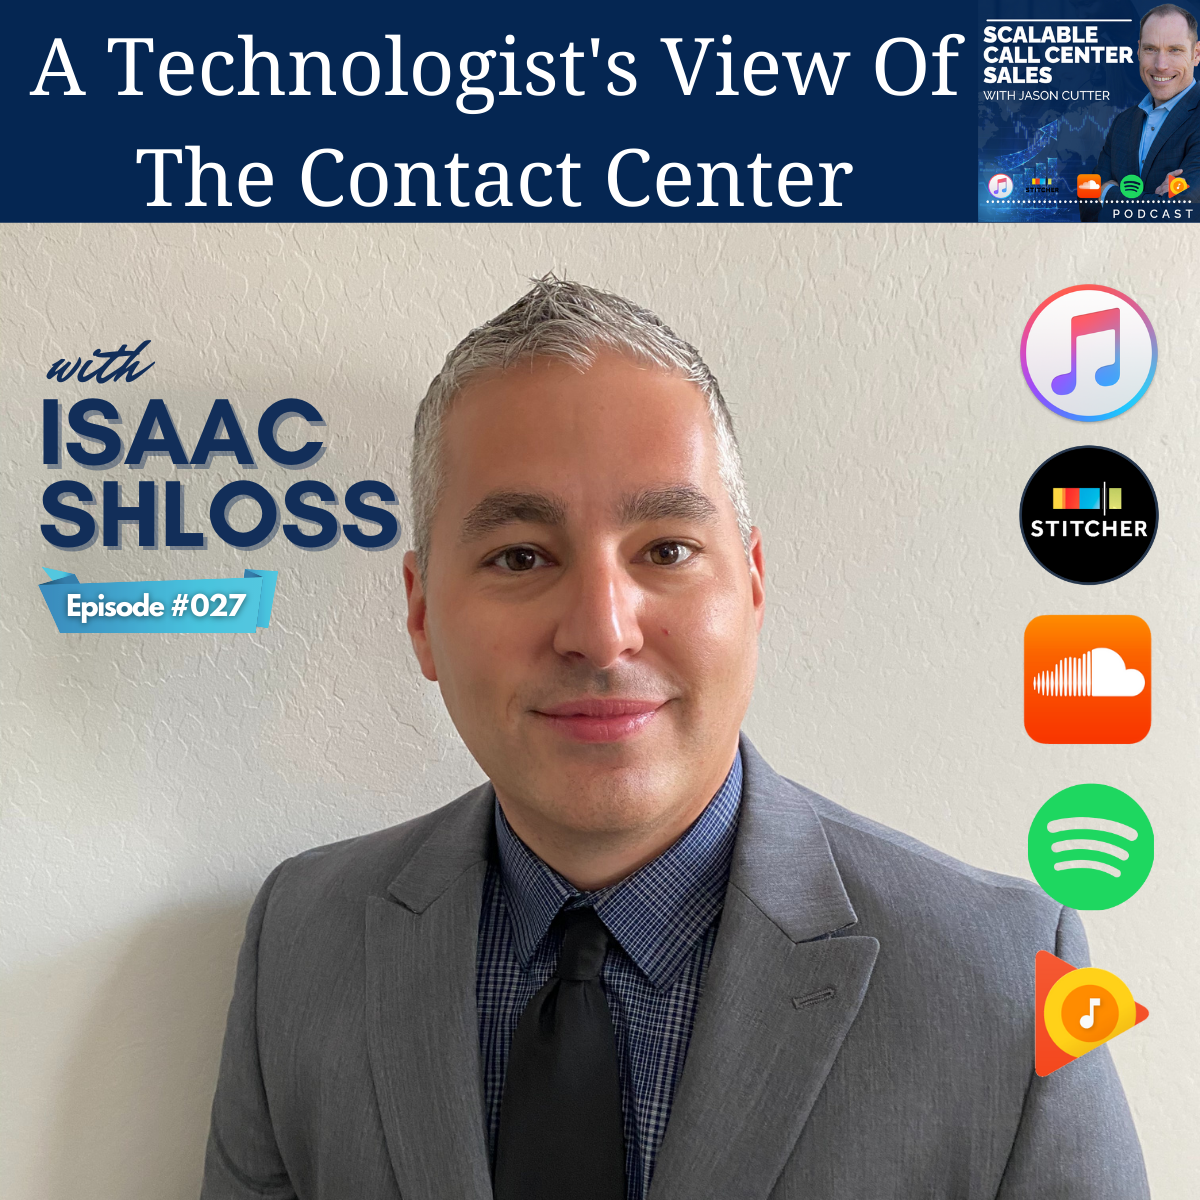 [027] A Technologist's View Of The Contact Center, with Isaac Shloss from GrupoNGN